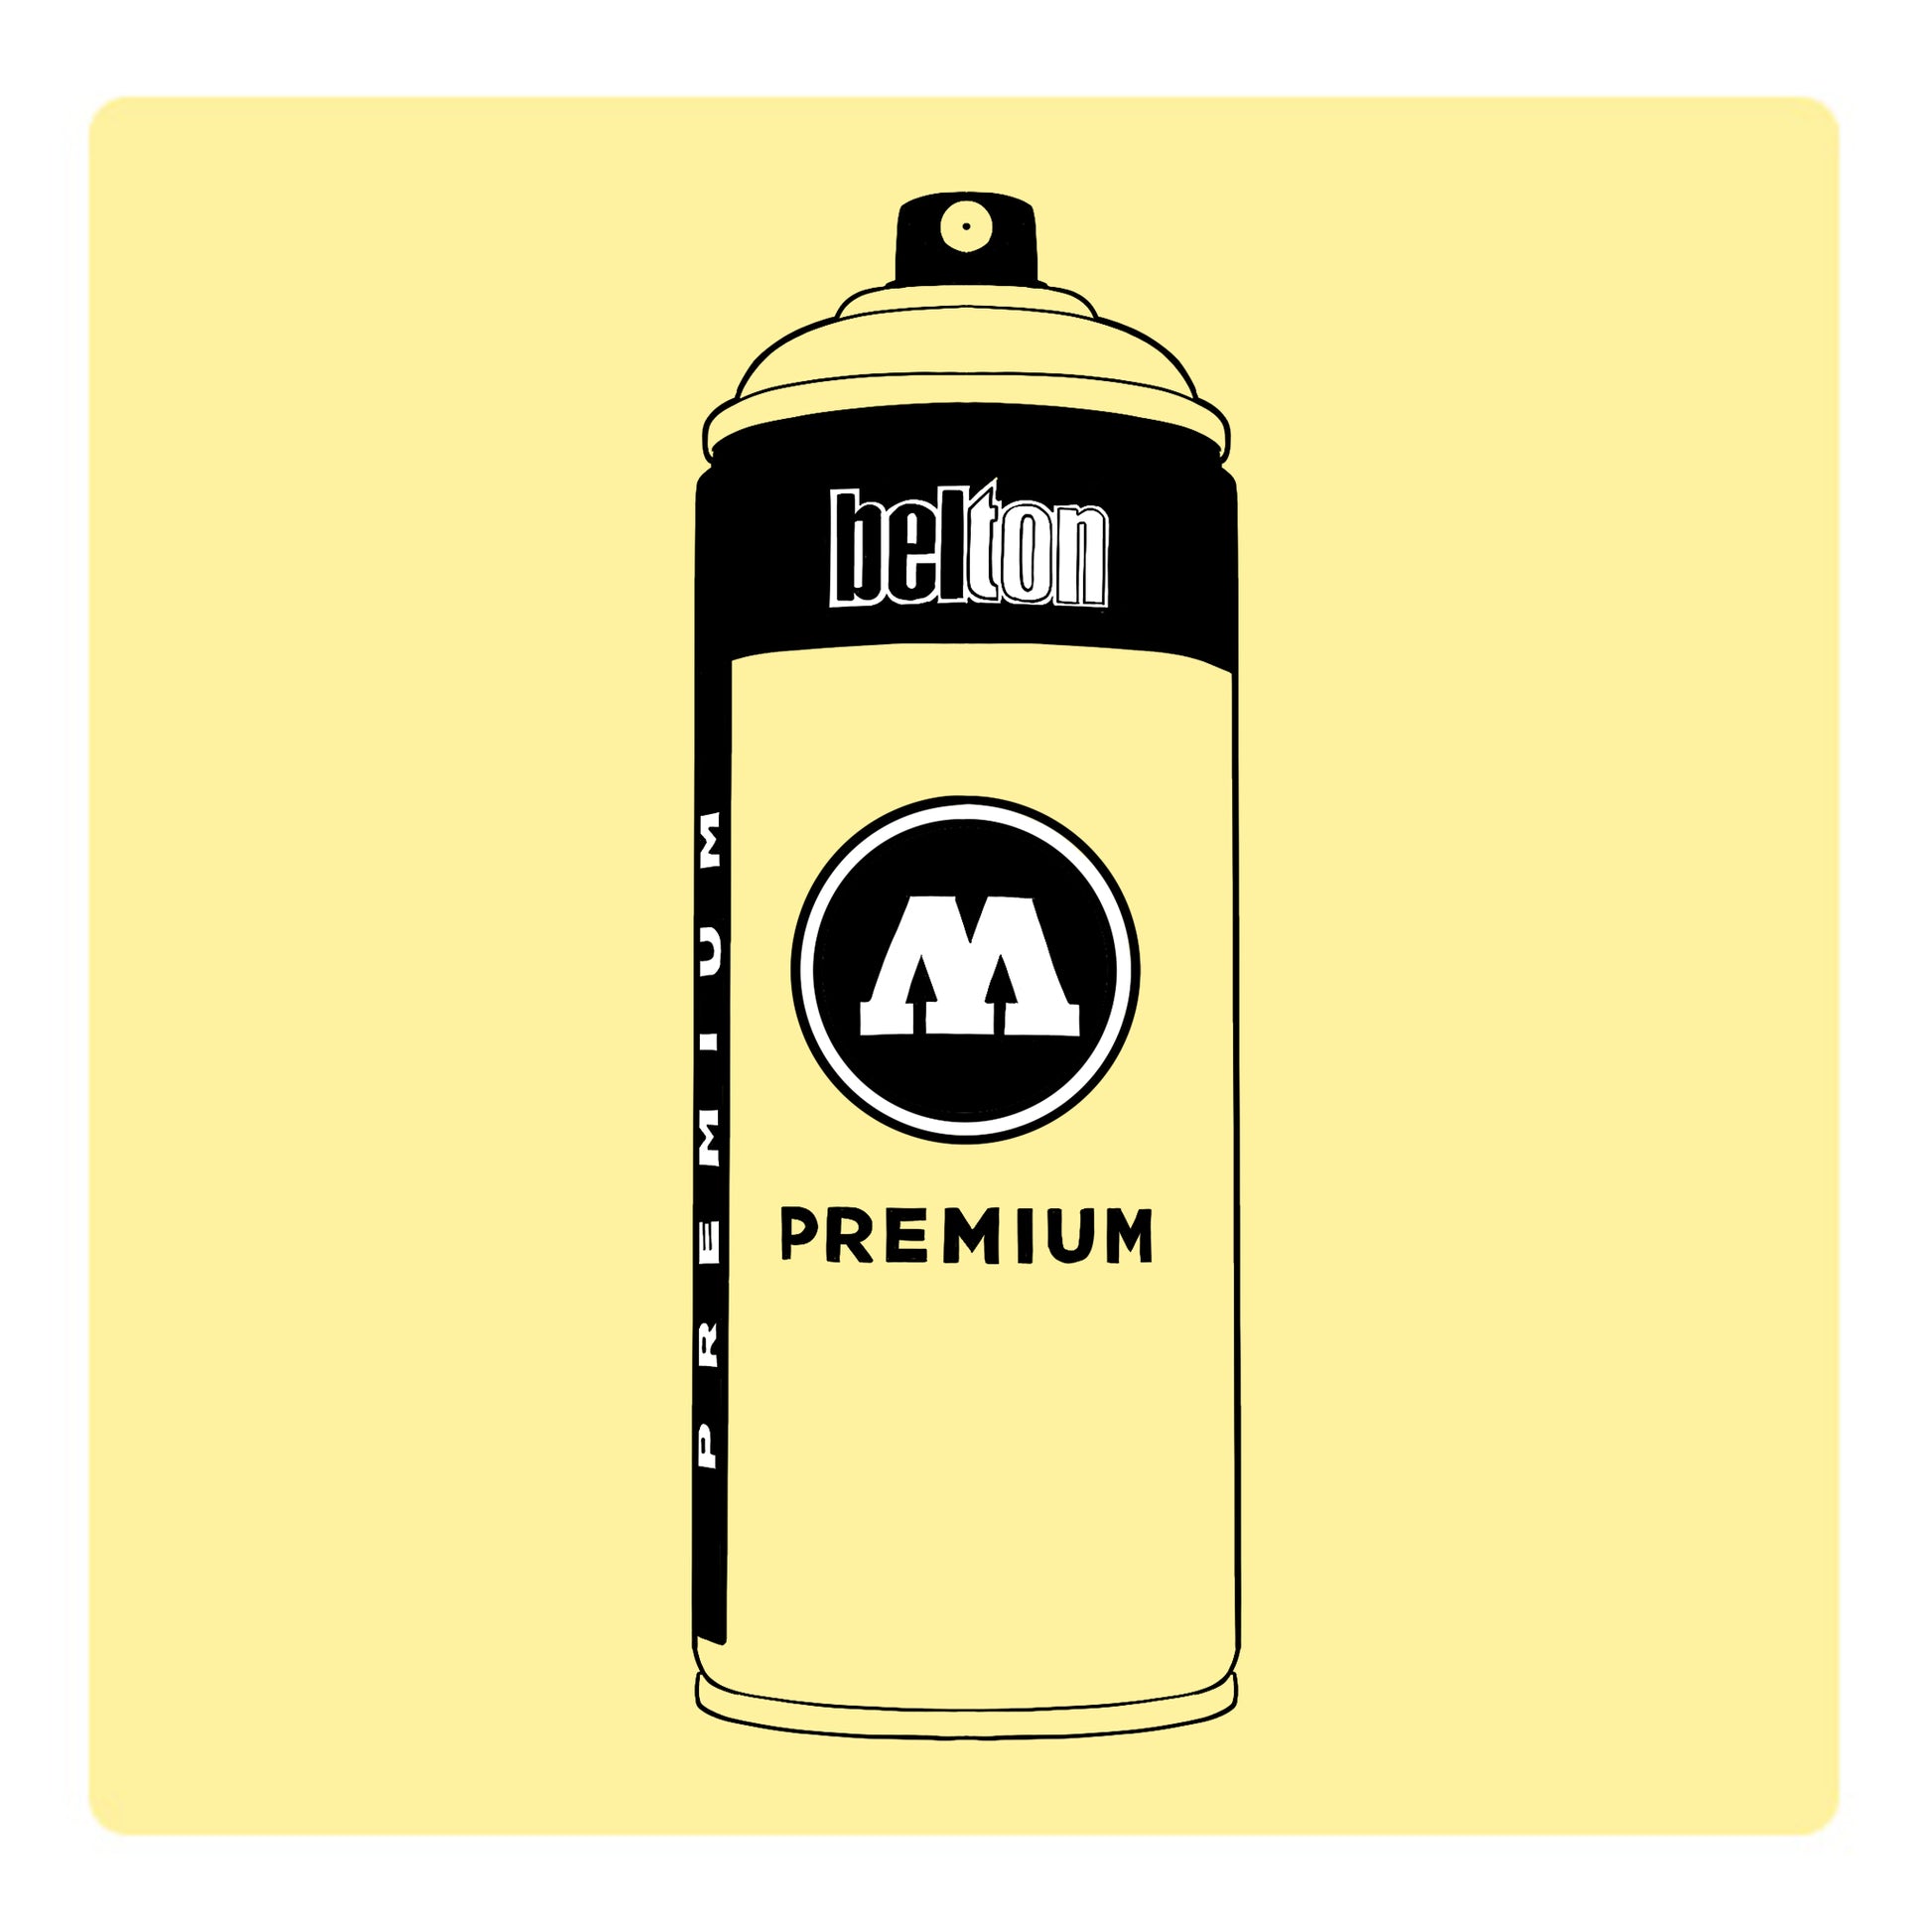 A black outline drawing of a light pastel yellow spray paint can with the words "belton","premium" and the letter"M" written on the face in black and white font. The background is a color swatch of the same light pastel yellow with a white border.